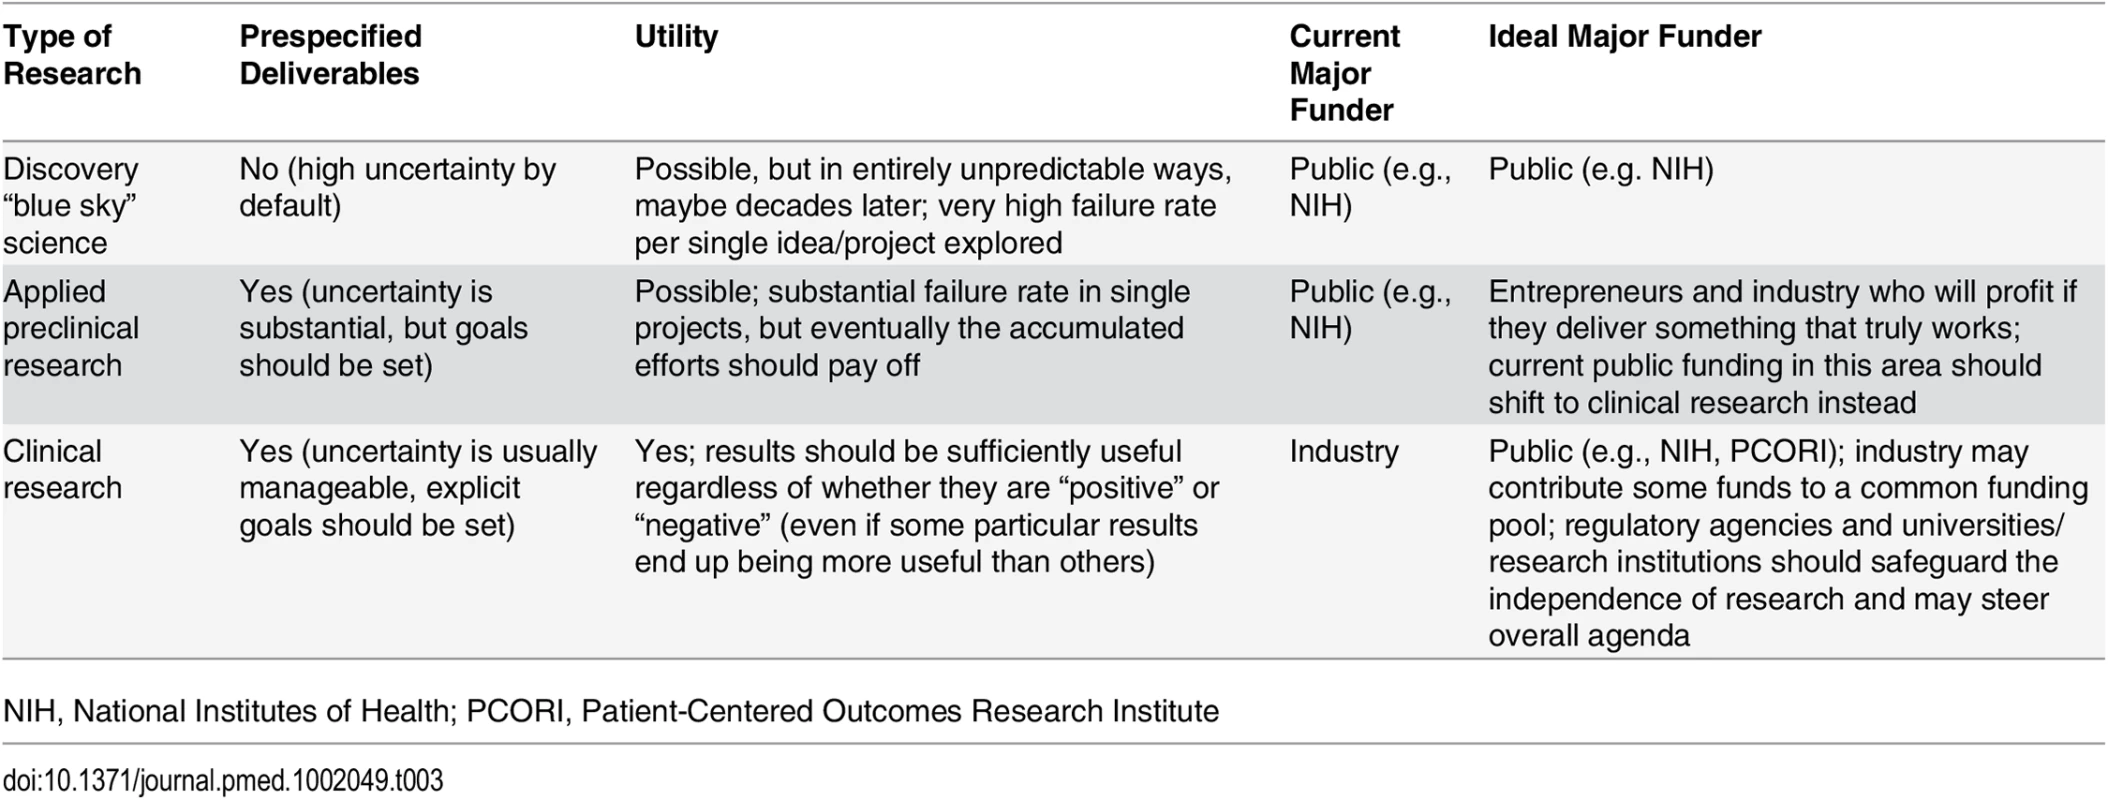 Funding of different types of research: Prespecified deliverables, utility, current funders, and ideal funders.